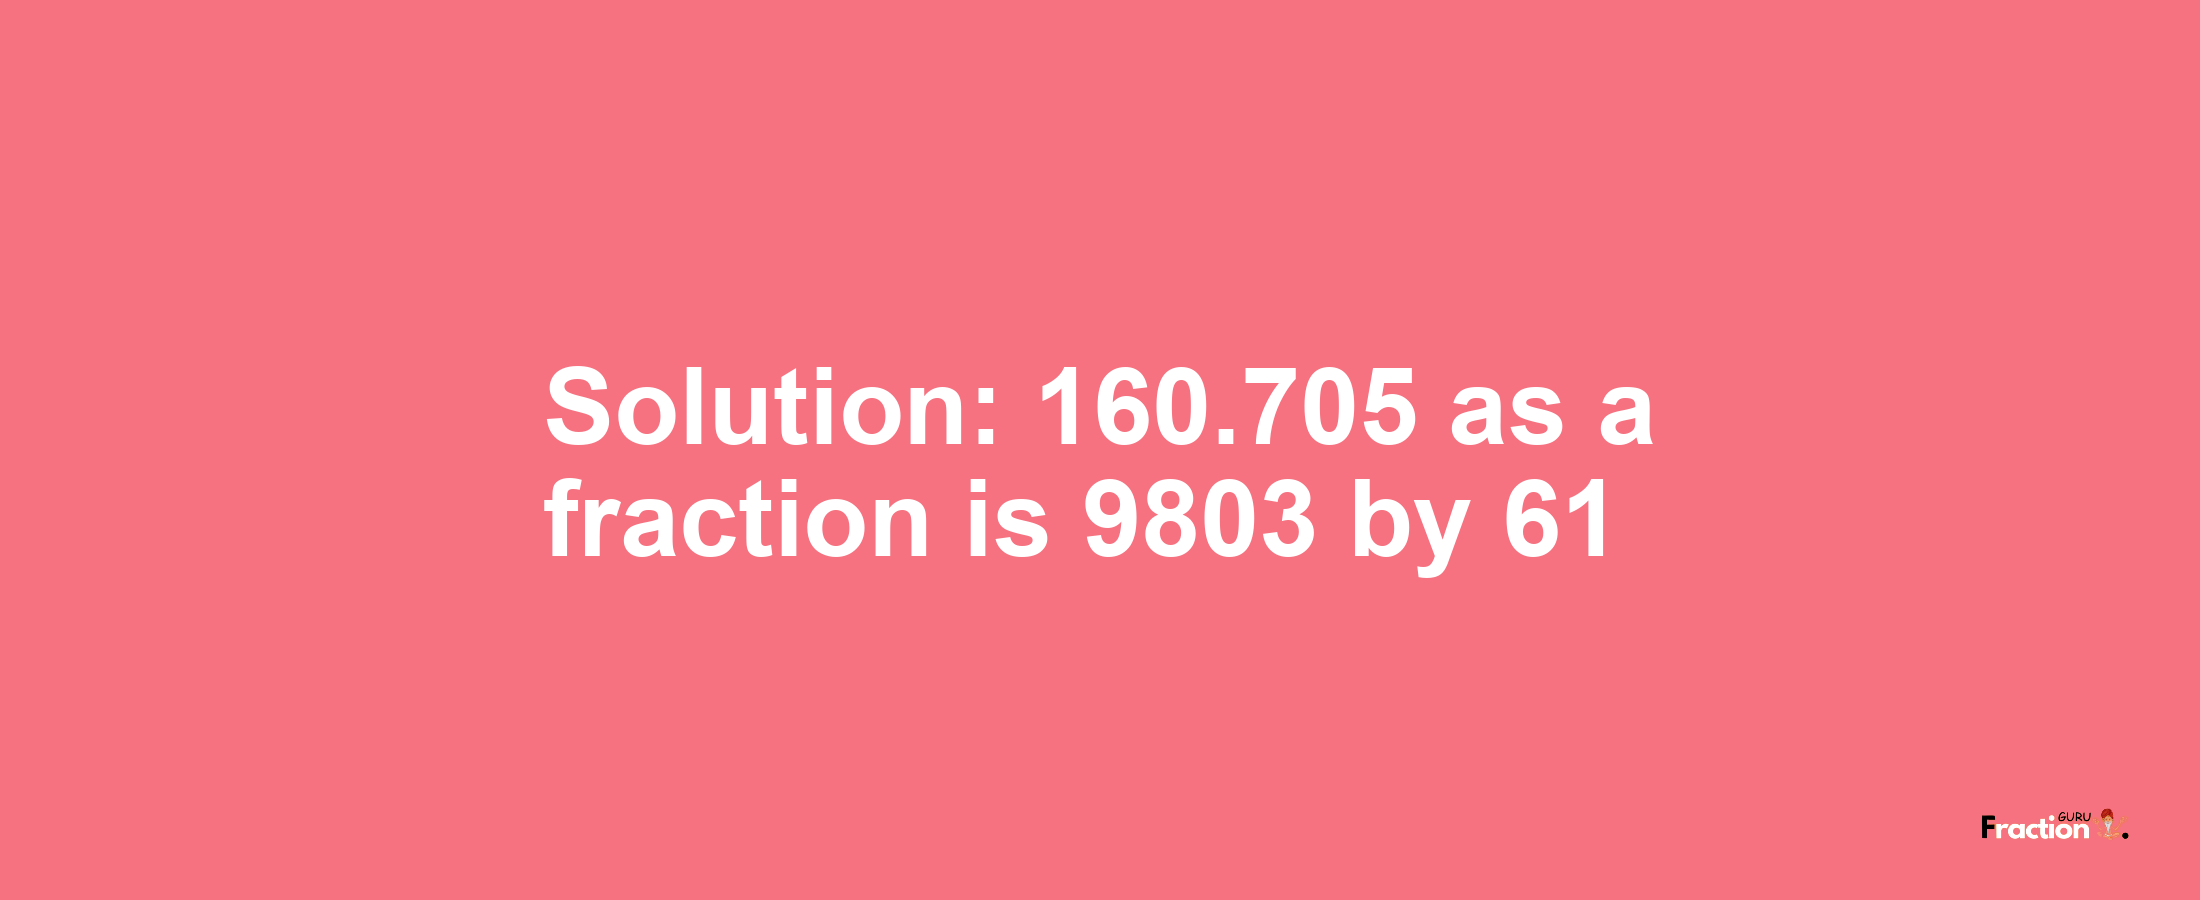 Solution:160.705 as a fraction is 9803/61